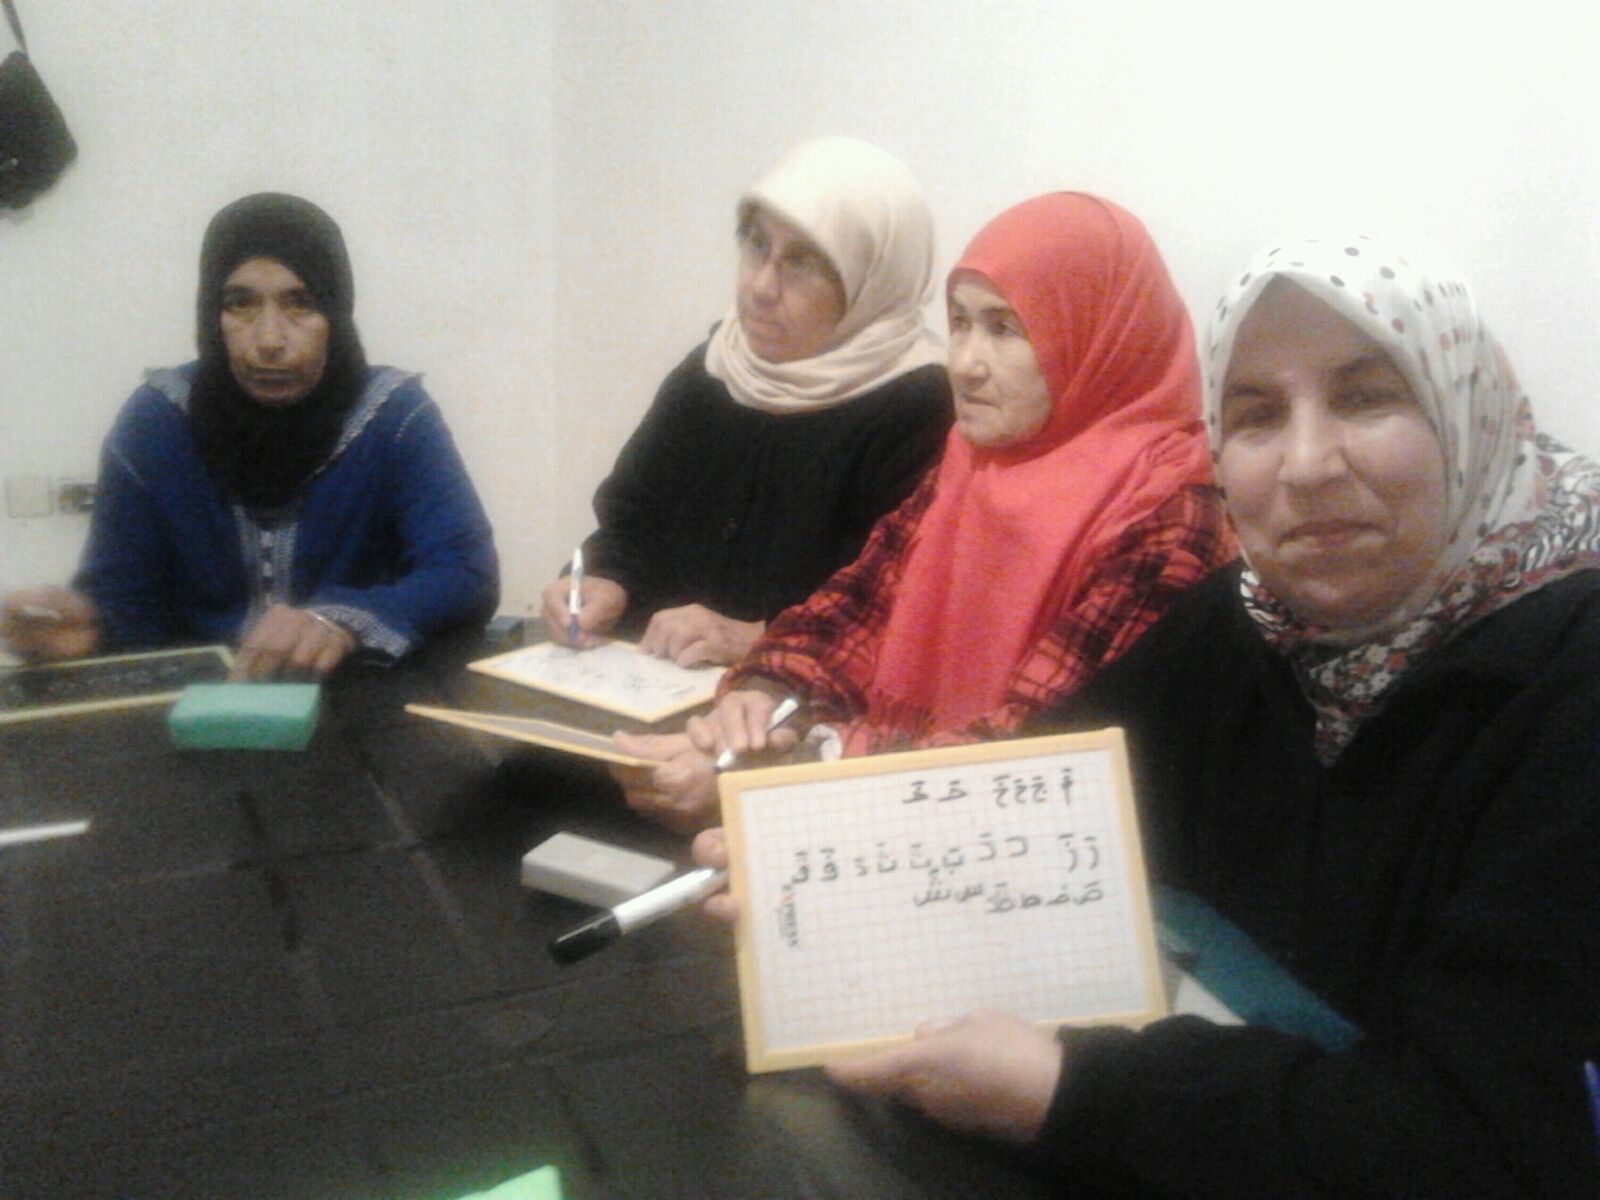 FTW Efforts Help 20 Illiterate Women Learn How to Read and Write at the Morocco Community Center